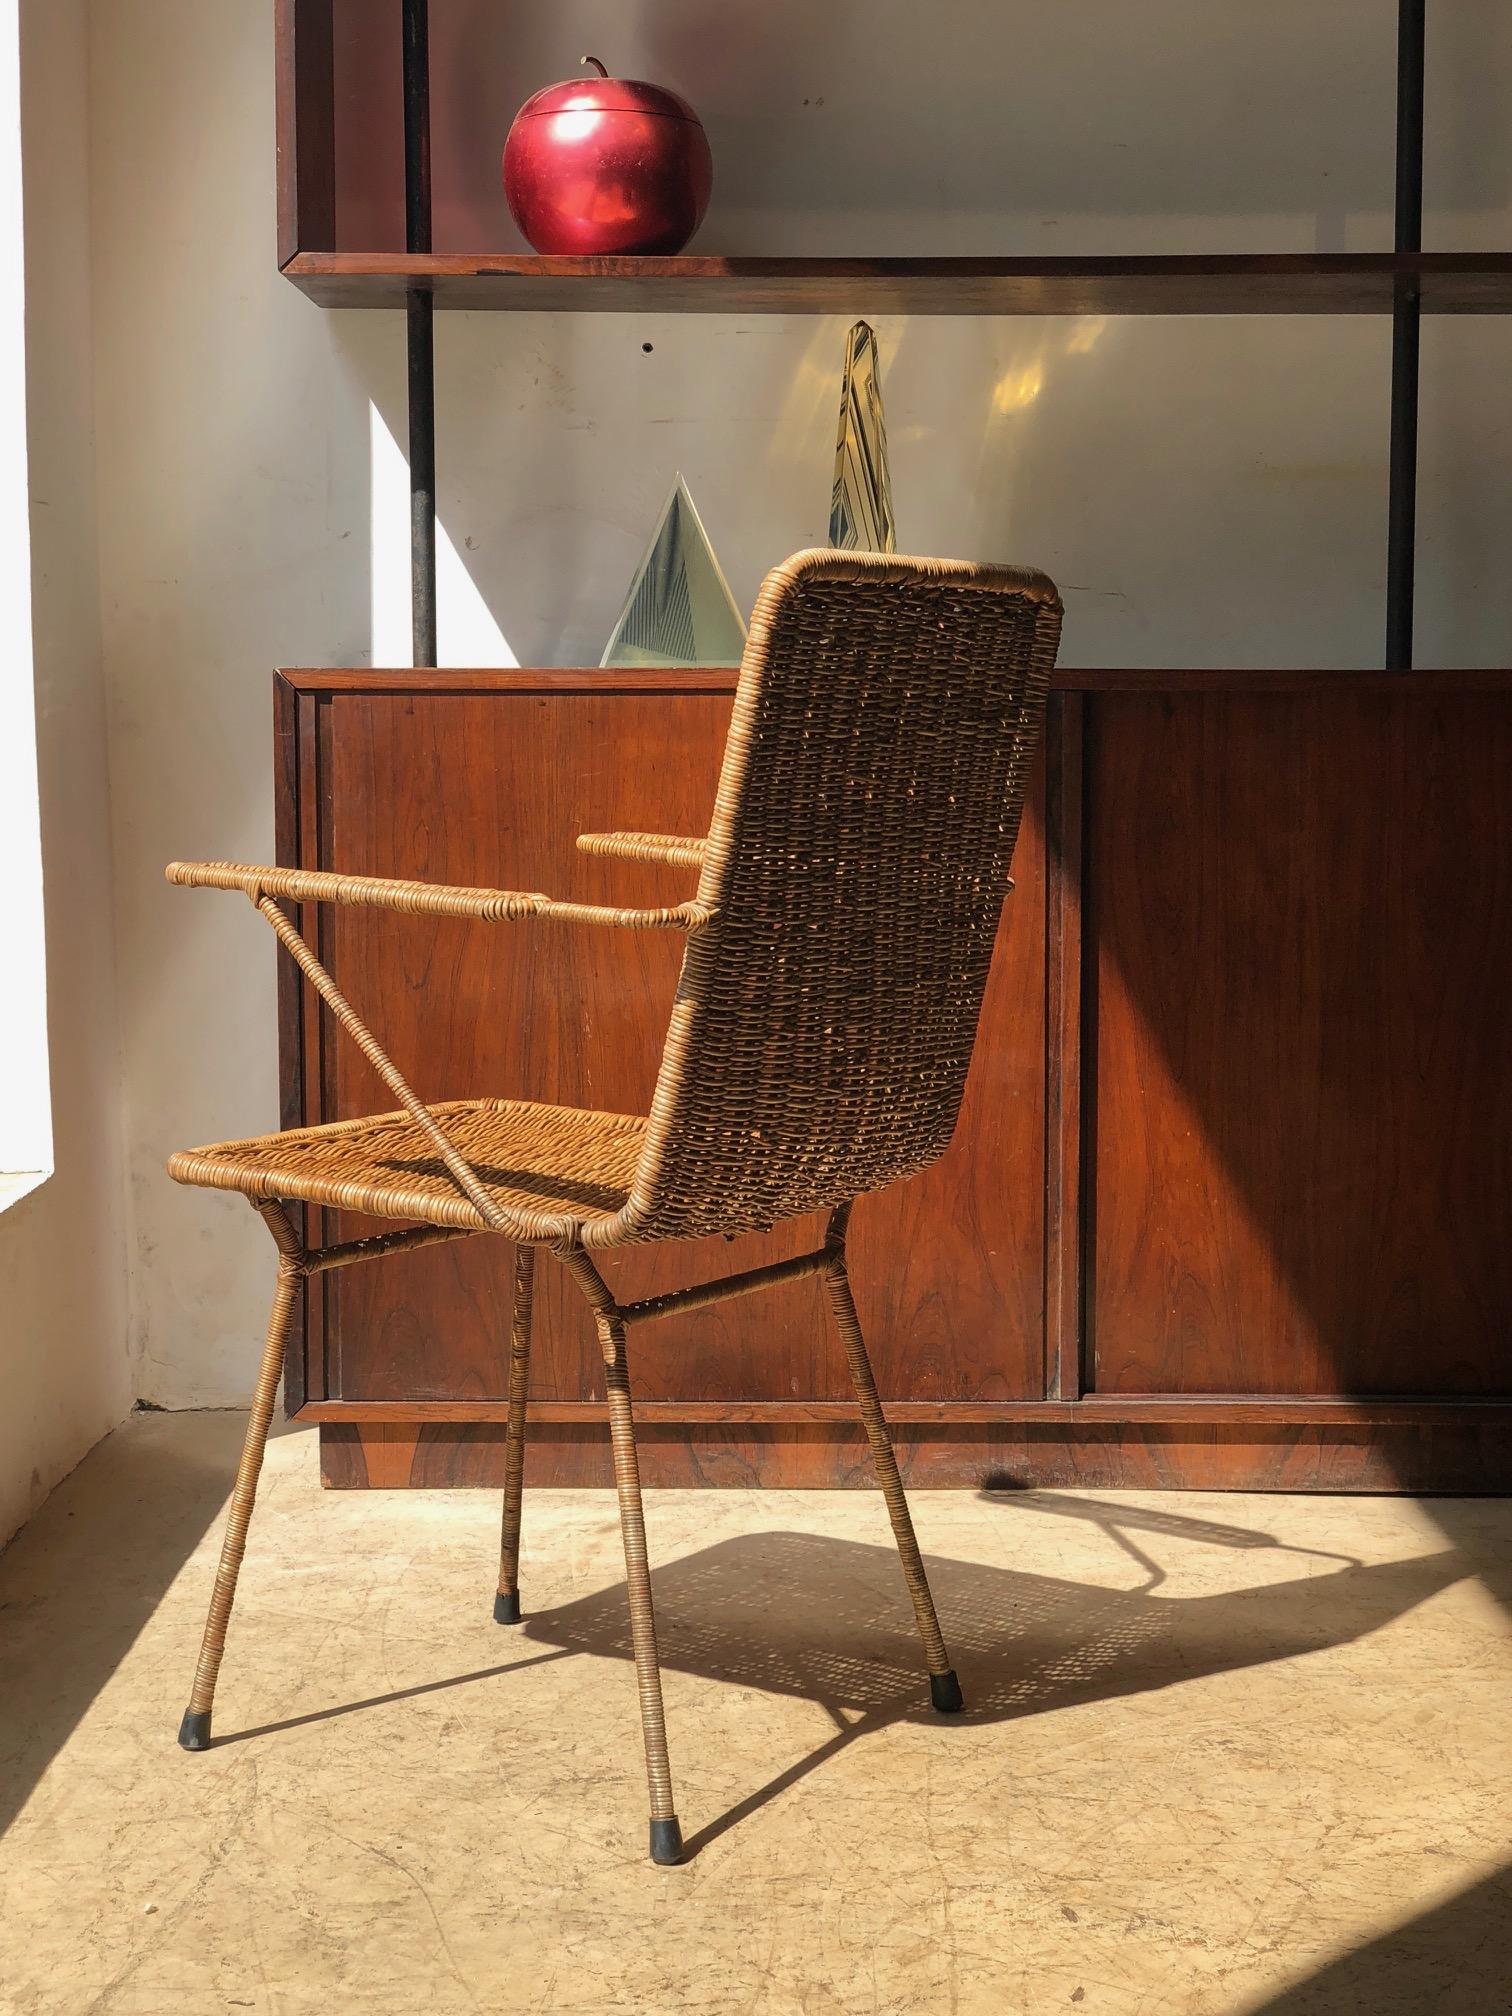 Pair of armchairs with iron structure and cane covering, designed by the Brazilian modern designer Carlo Hauner in the 1950s.